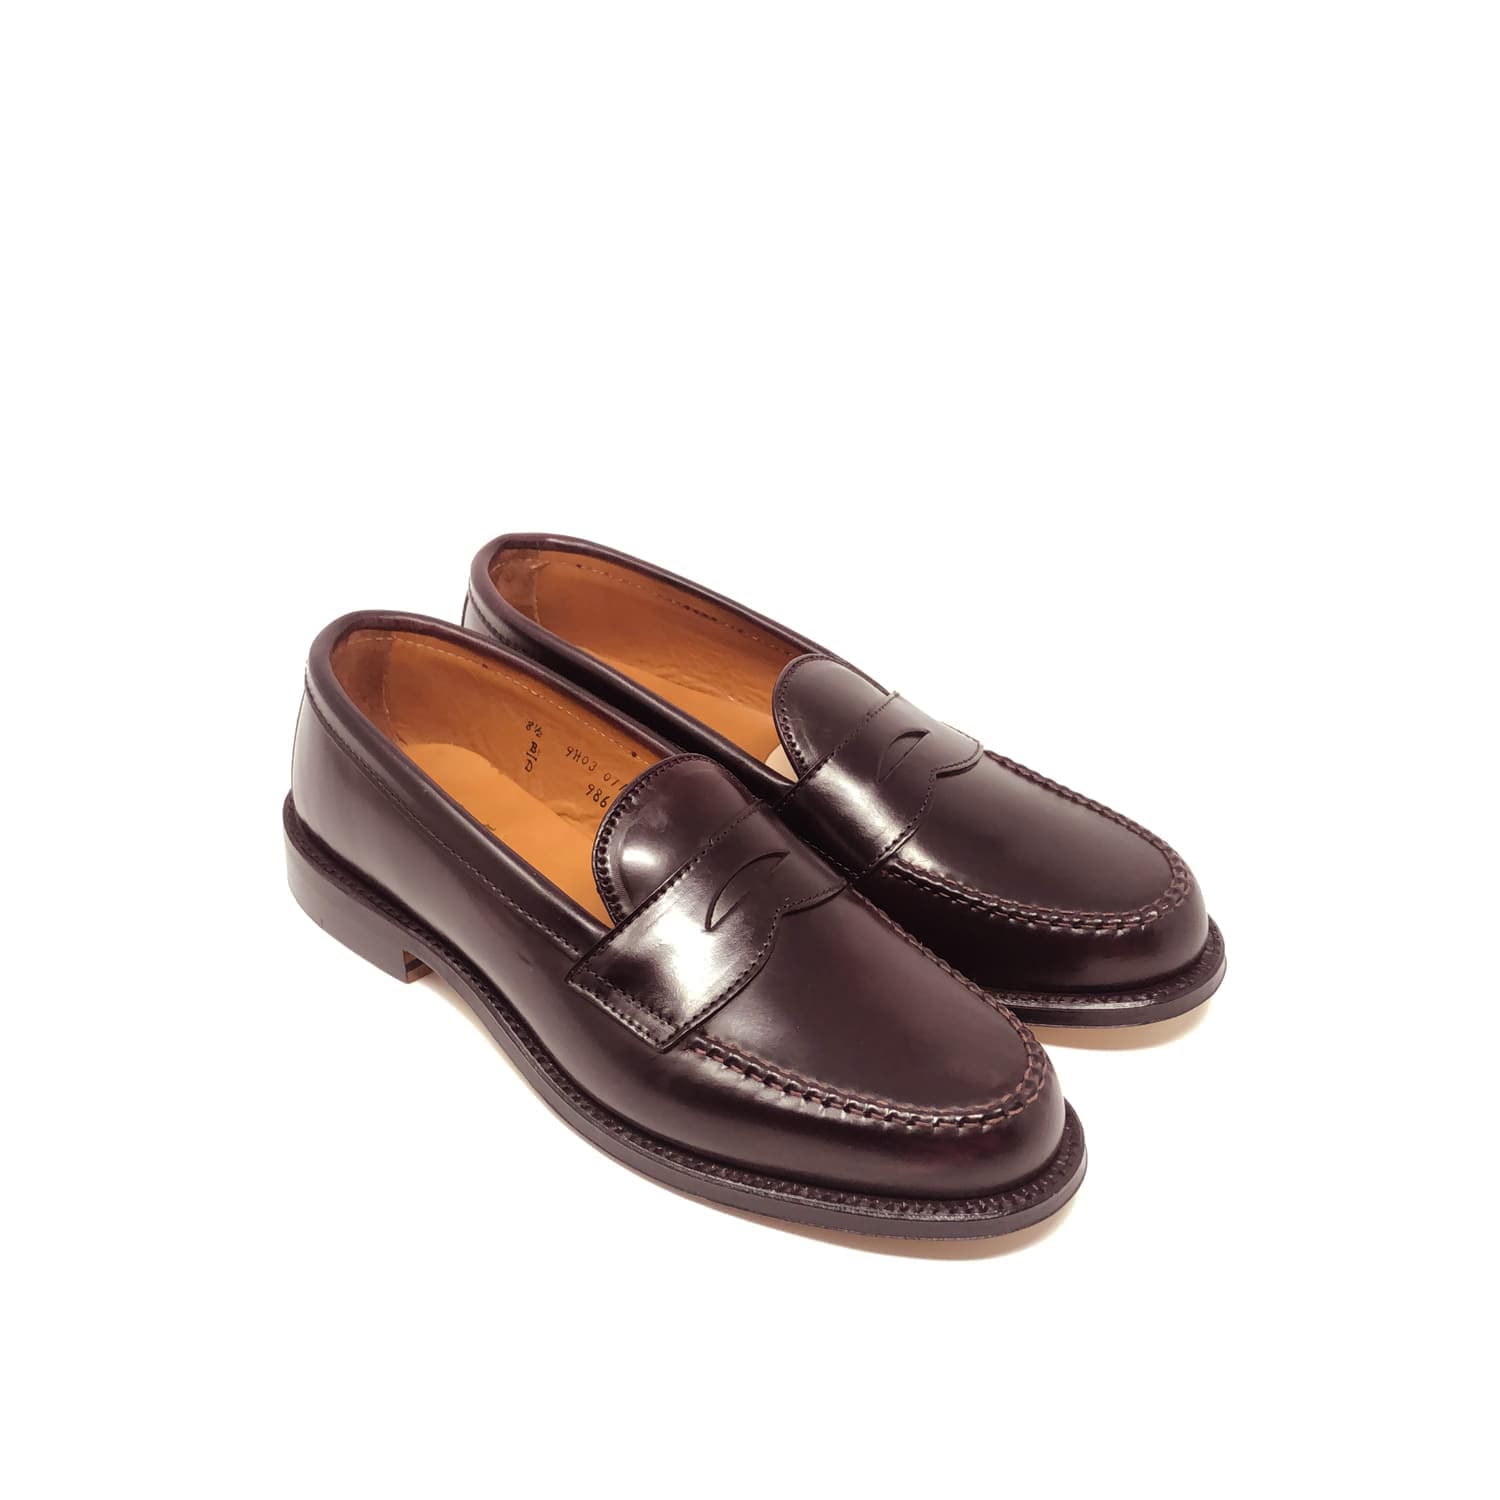 986 Handsewn Penny Loafer Color 8 Shell Cordovan - Snake Oil Provisions